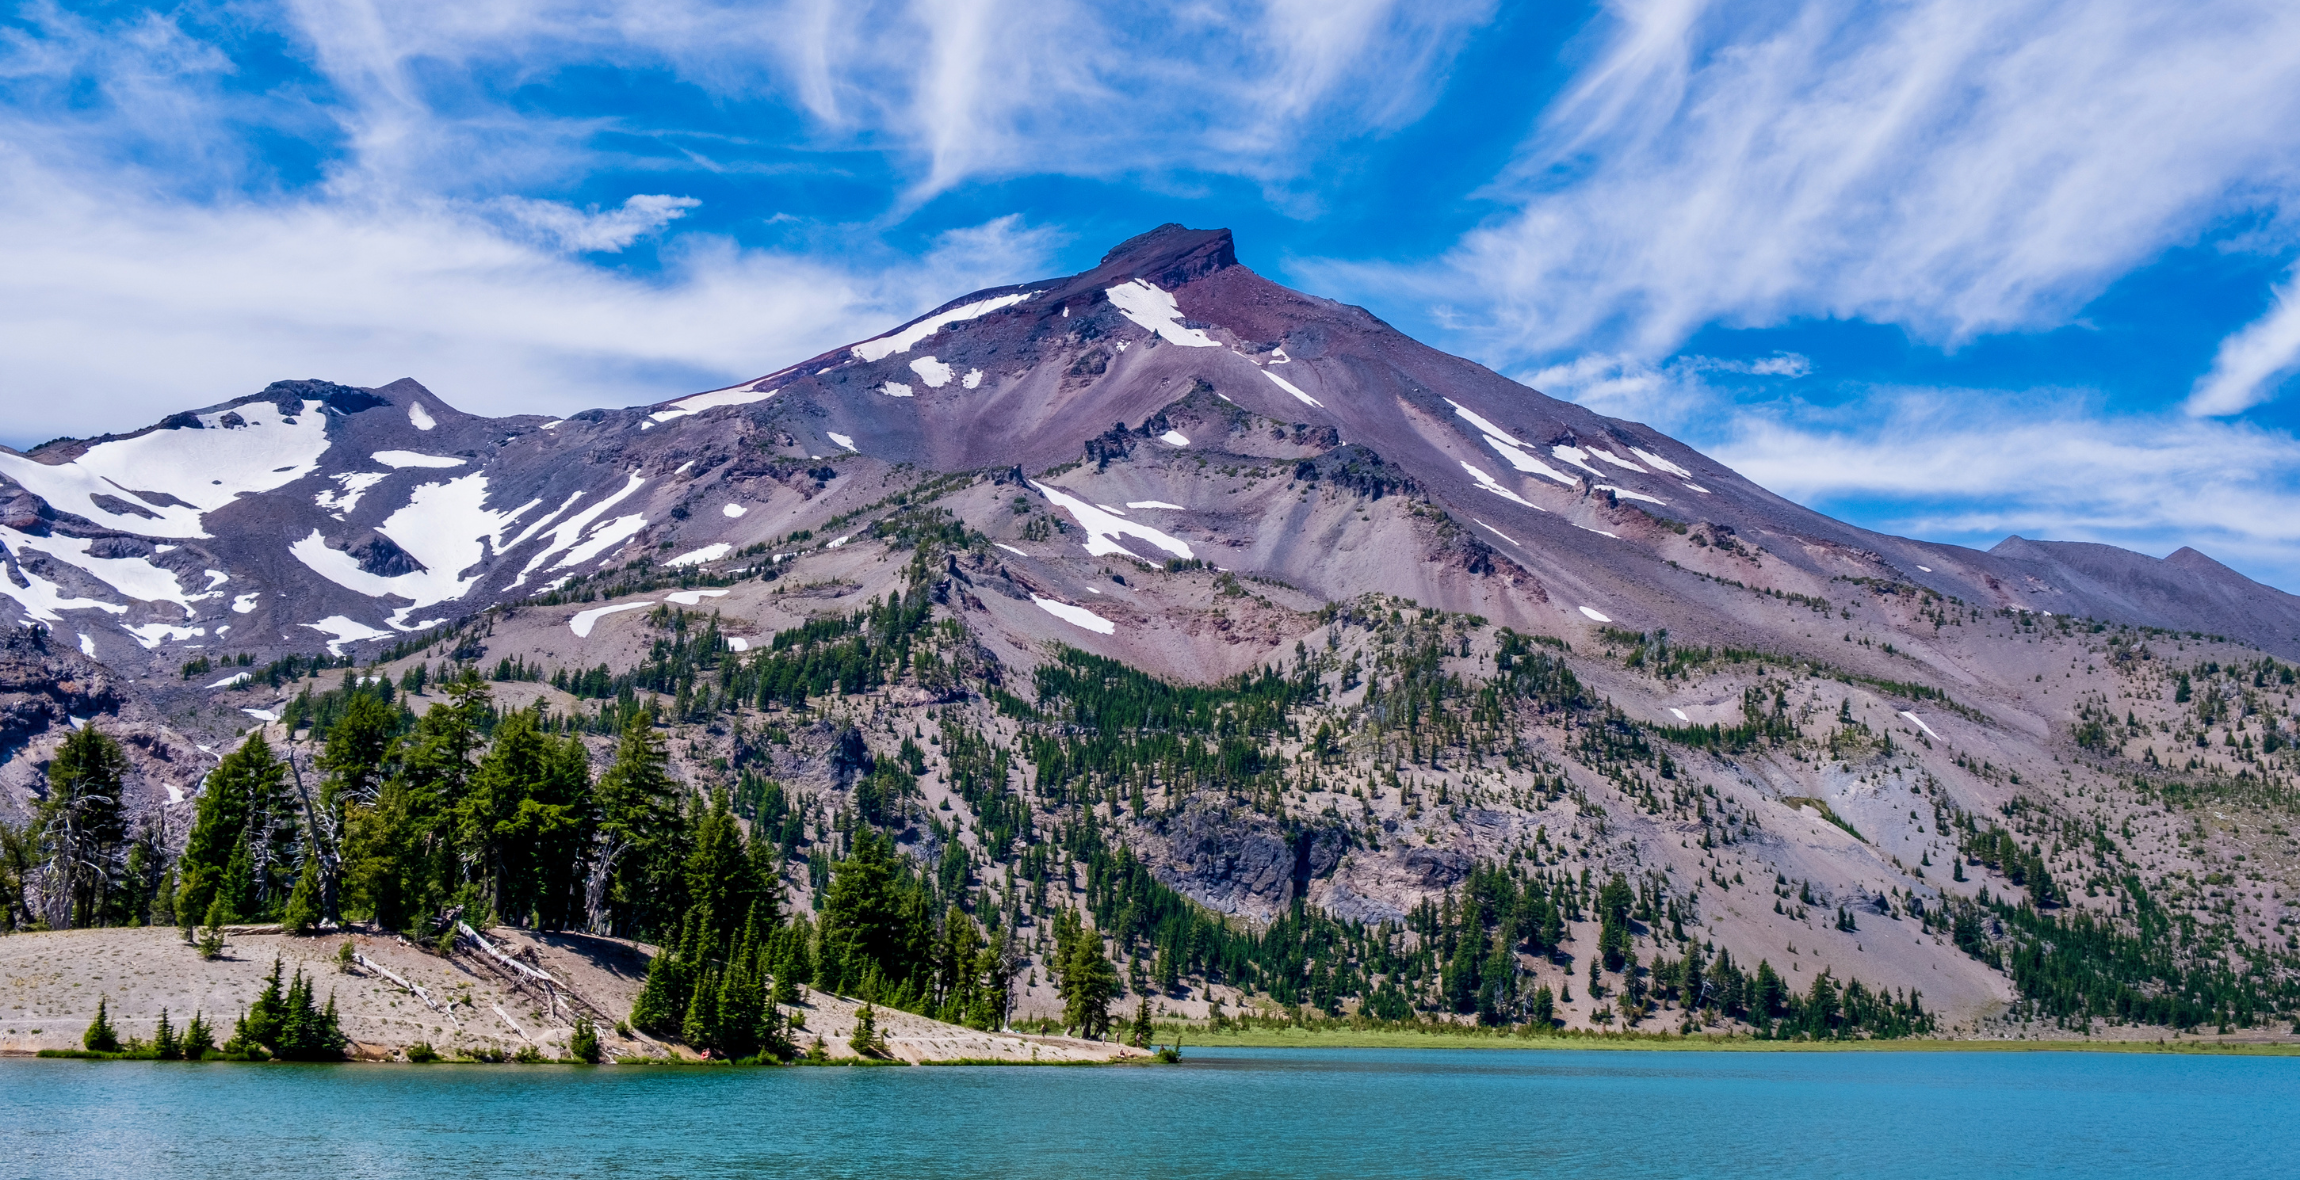 A snowy mountain sits behind a blue lake in Oregon